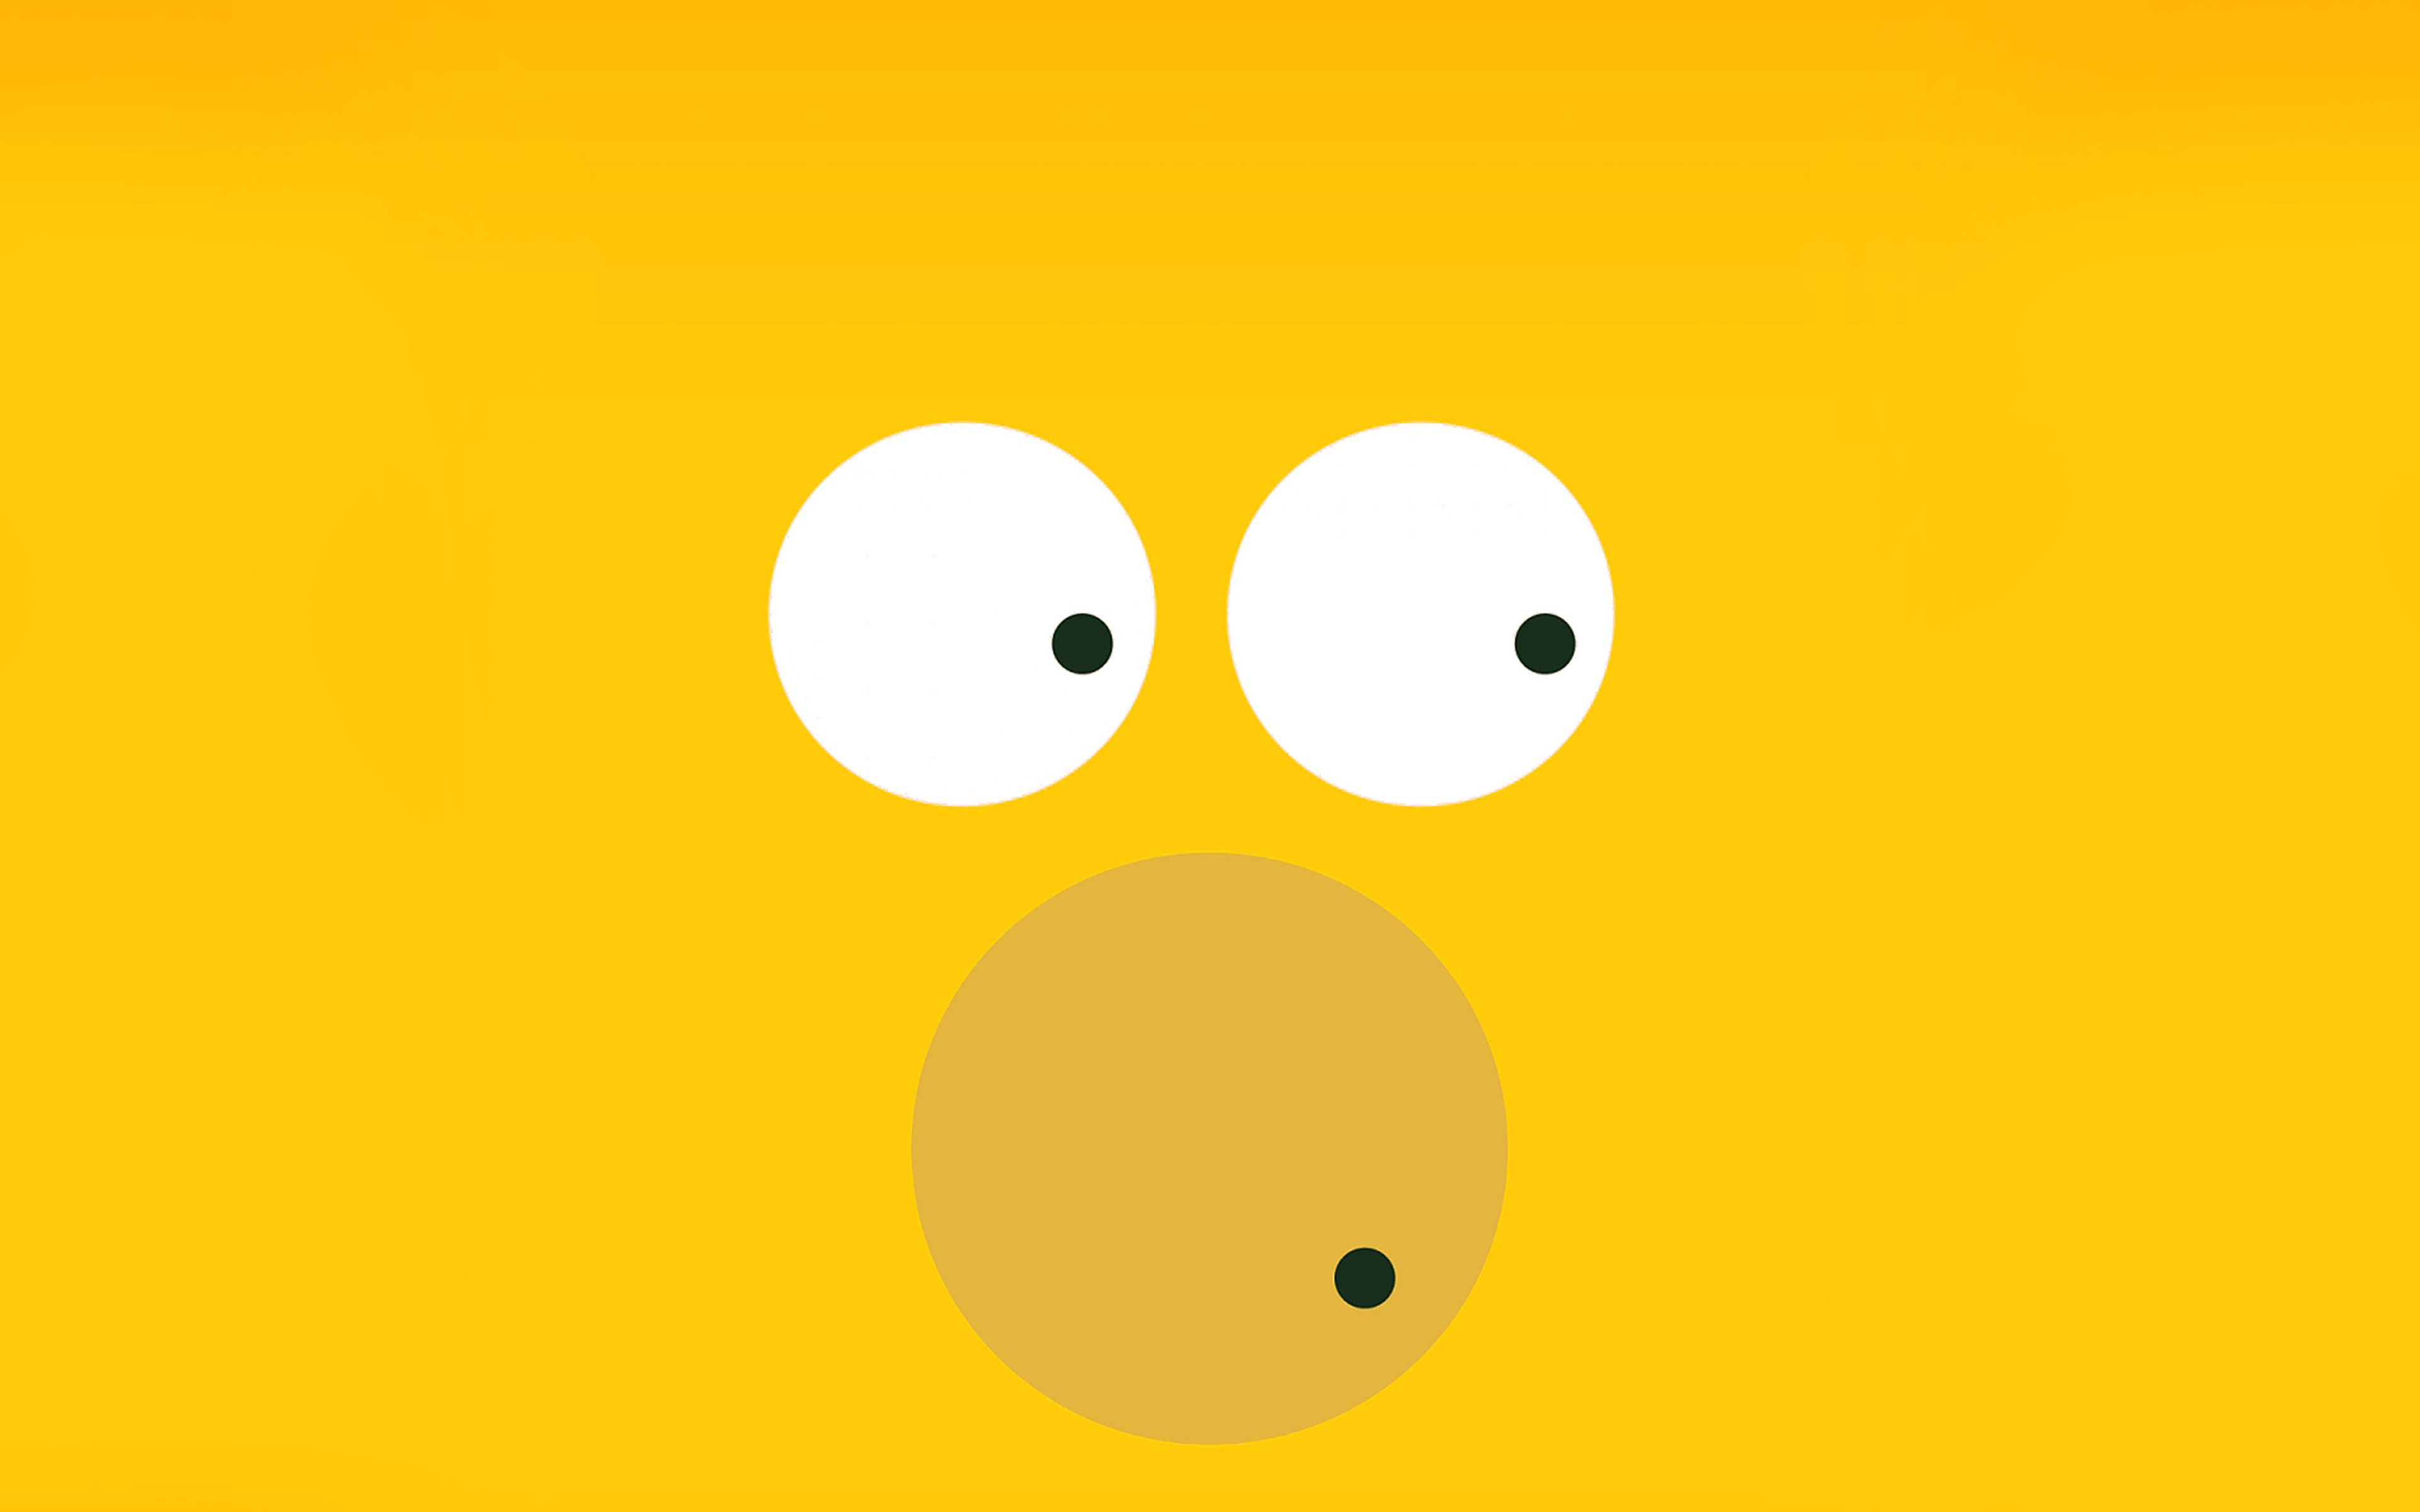 A minimalist wallpaper of Homer Simpson from the simpsons with a yellow background - Homer Simpson